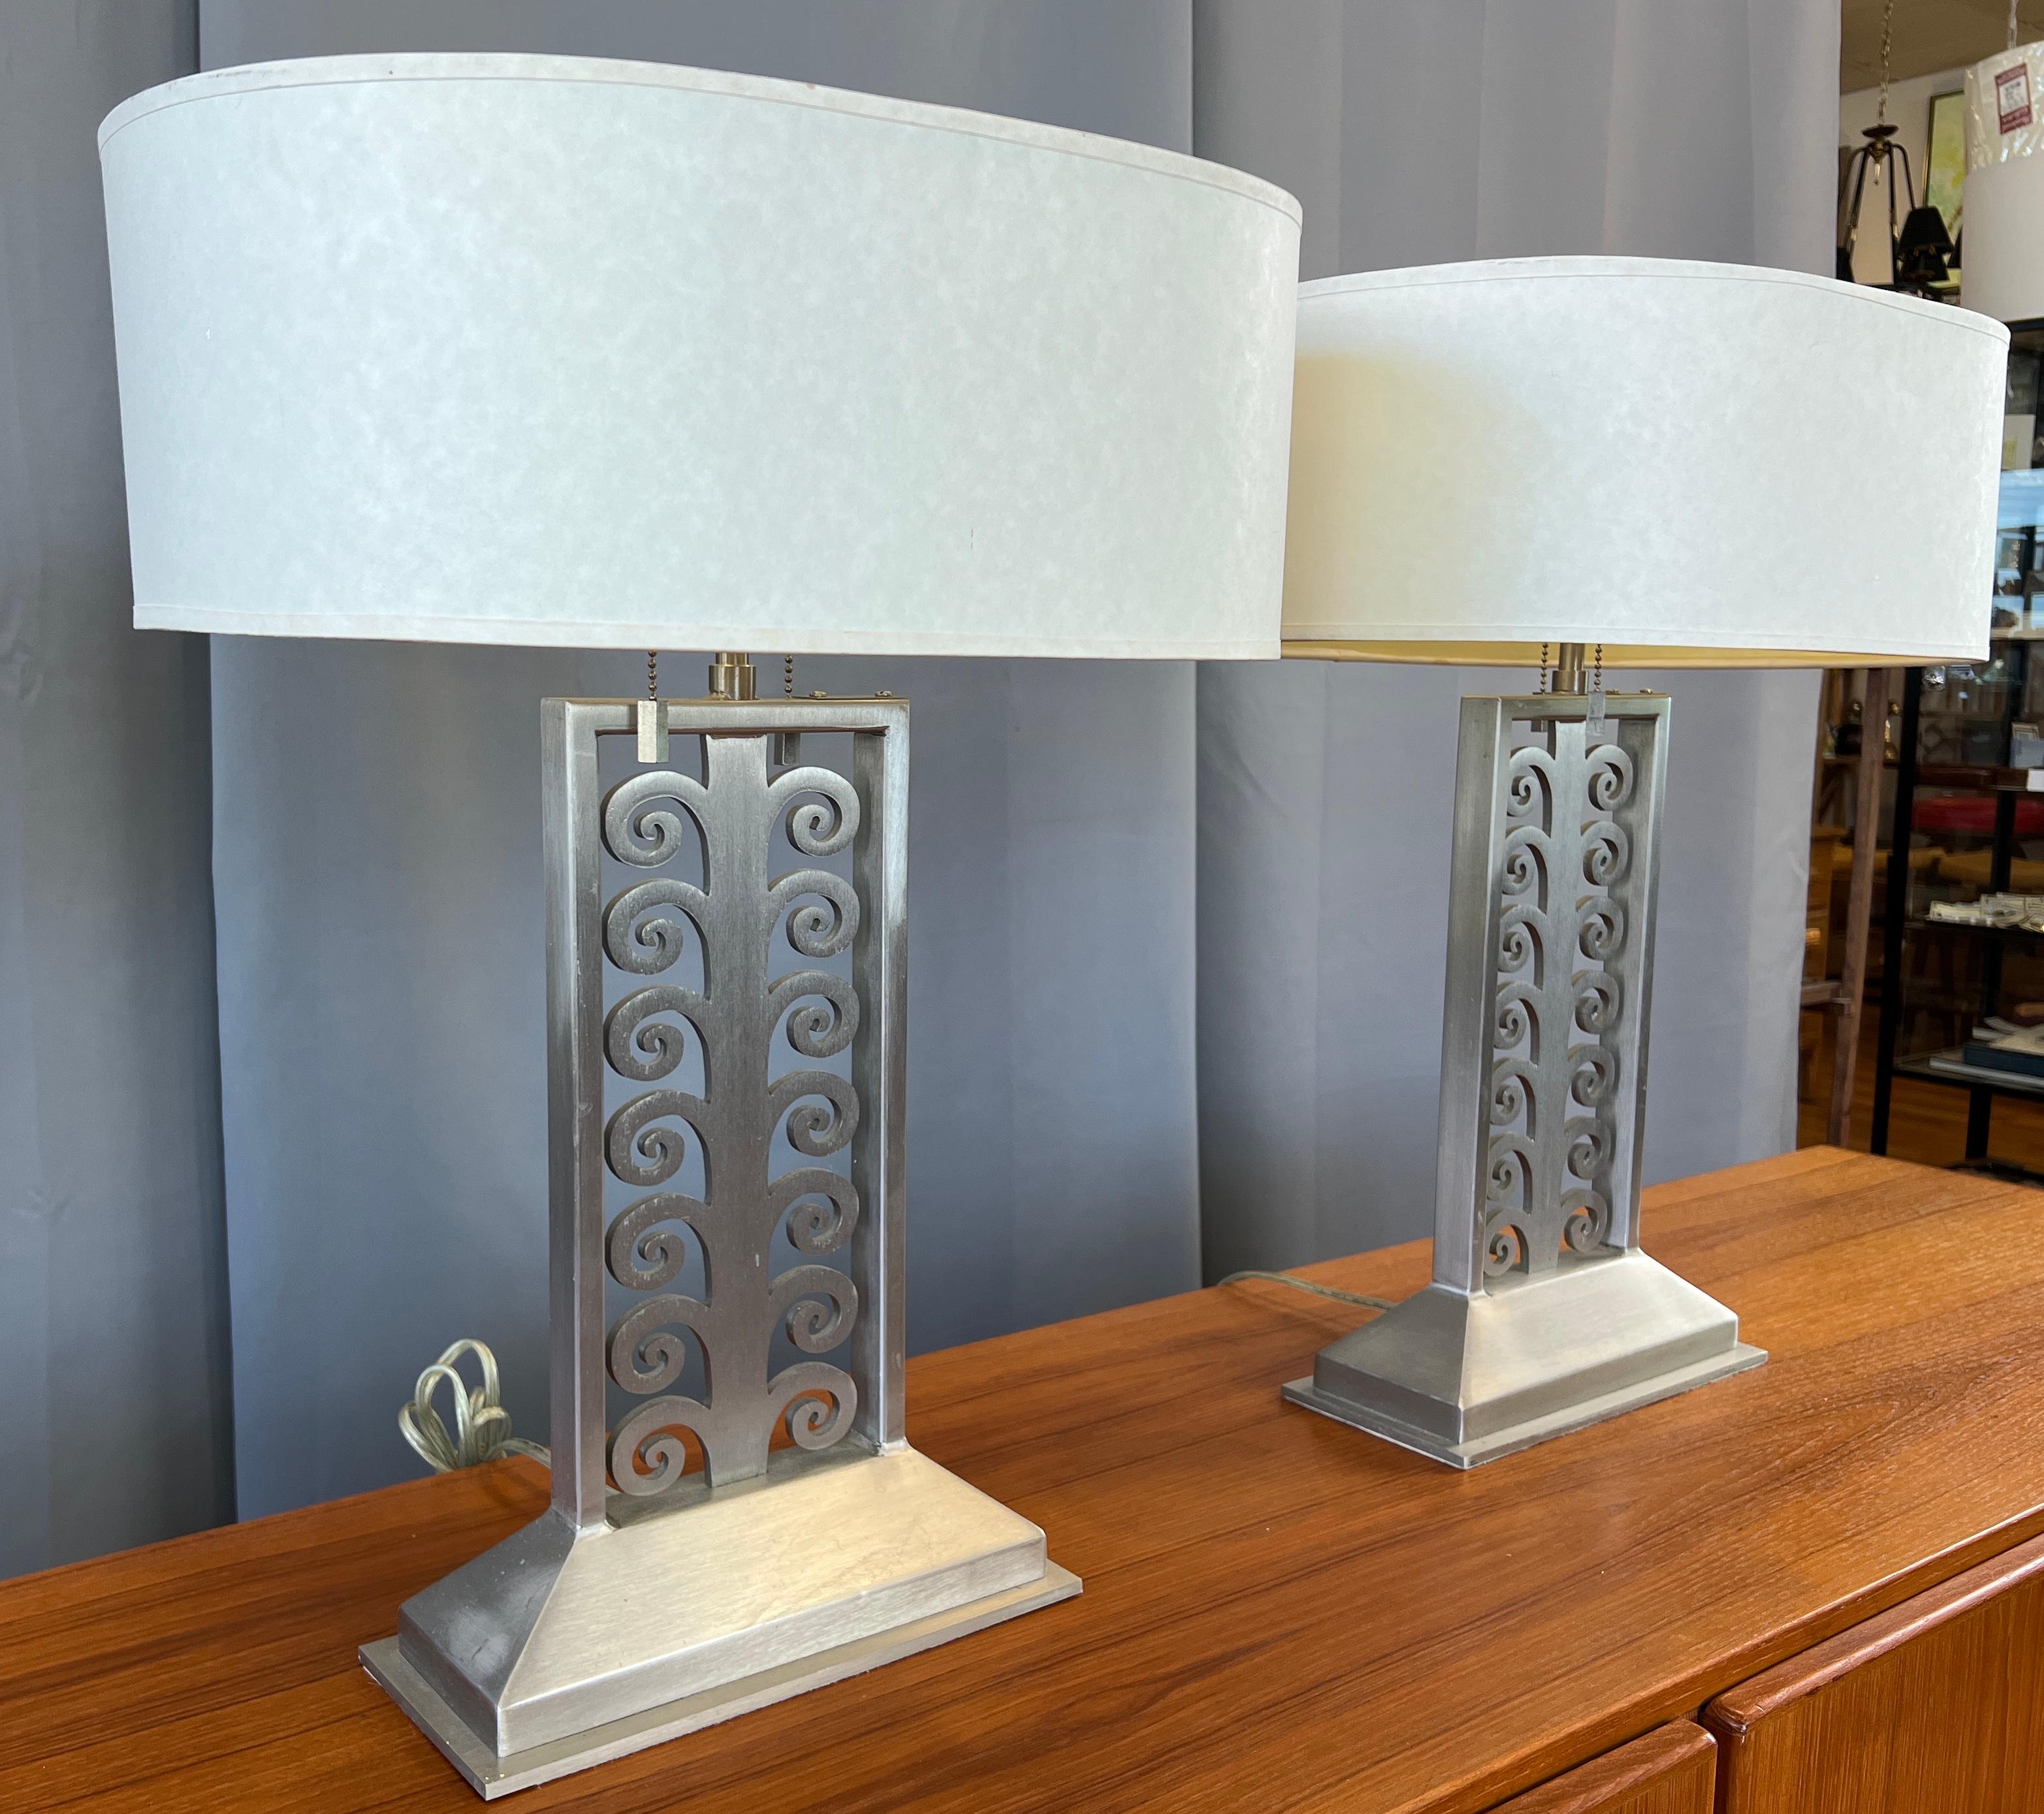 Offered here are a pair of Sirmos designed and made table lamps. Both have labels on their underside. 
In brushed stainless steel, with the center a framed laser cut scroll work design, on substantial bases.
Cream color oval shape lamp shades top